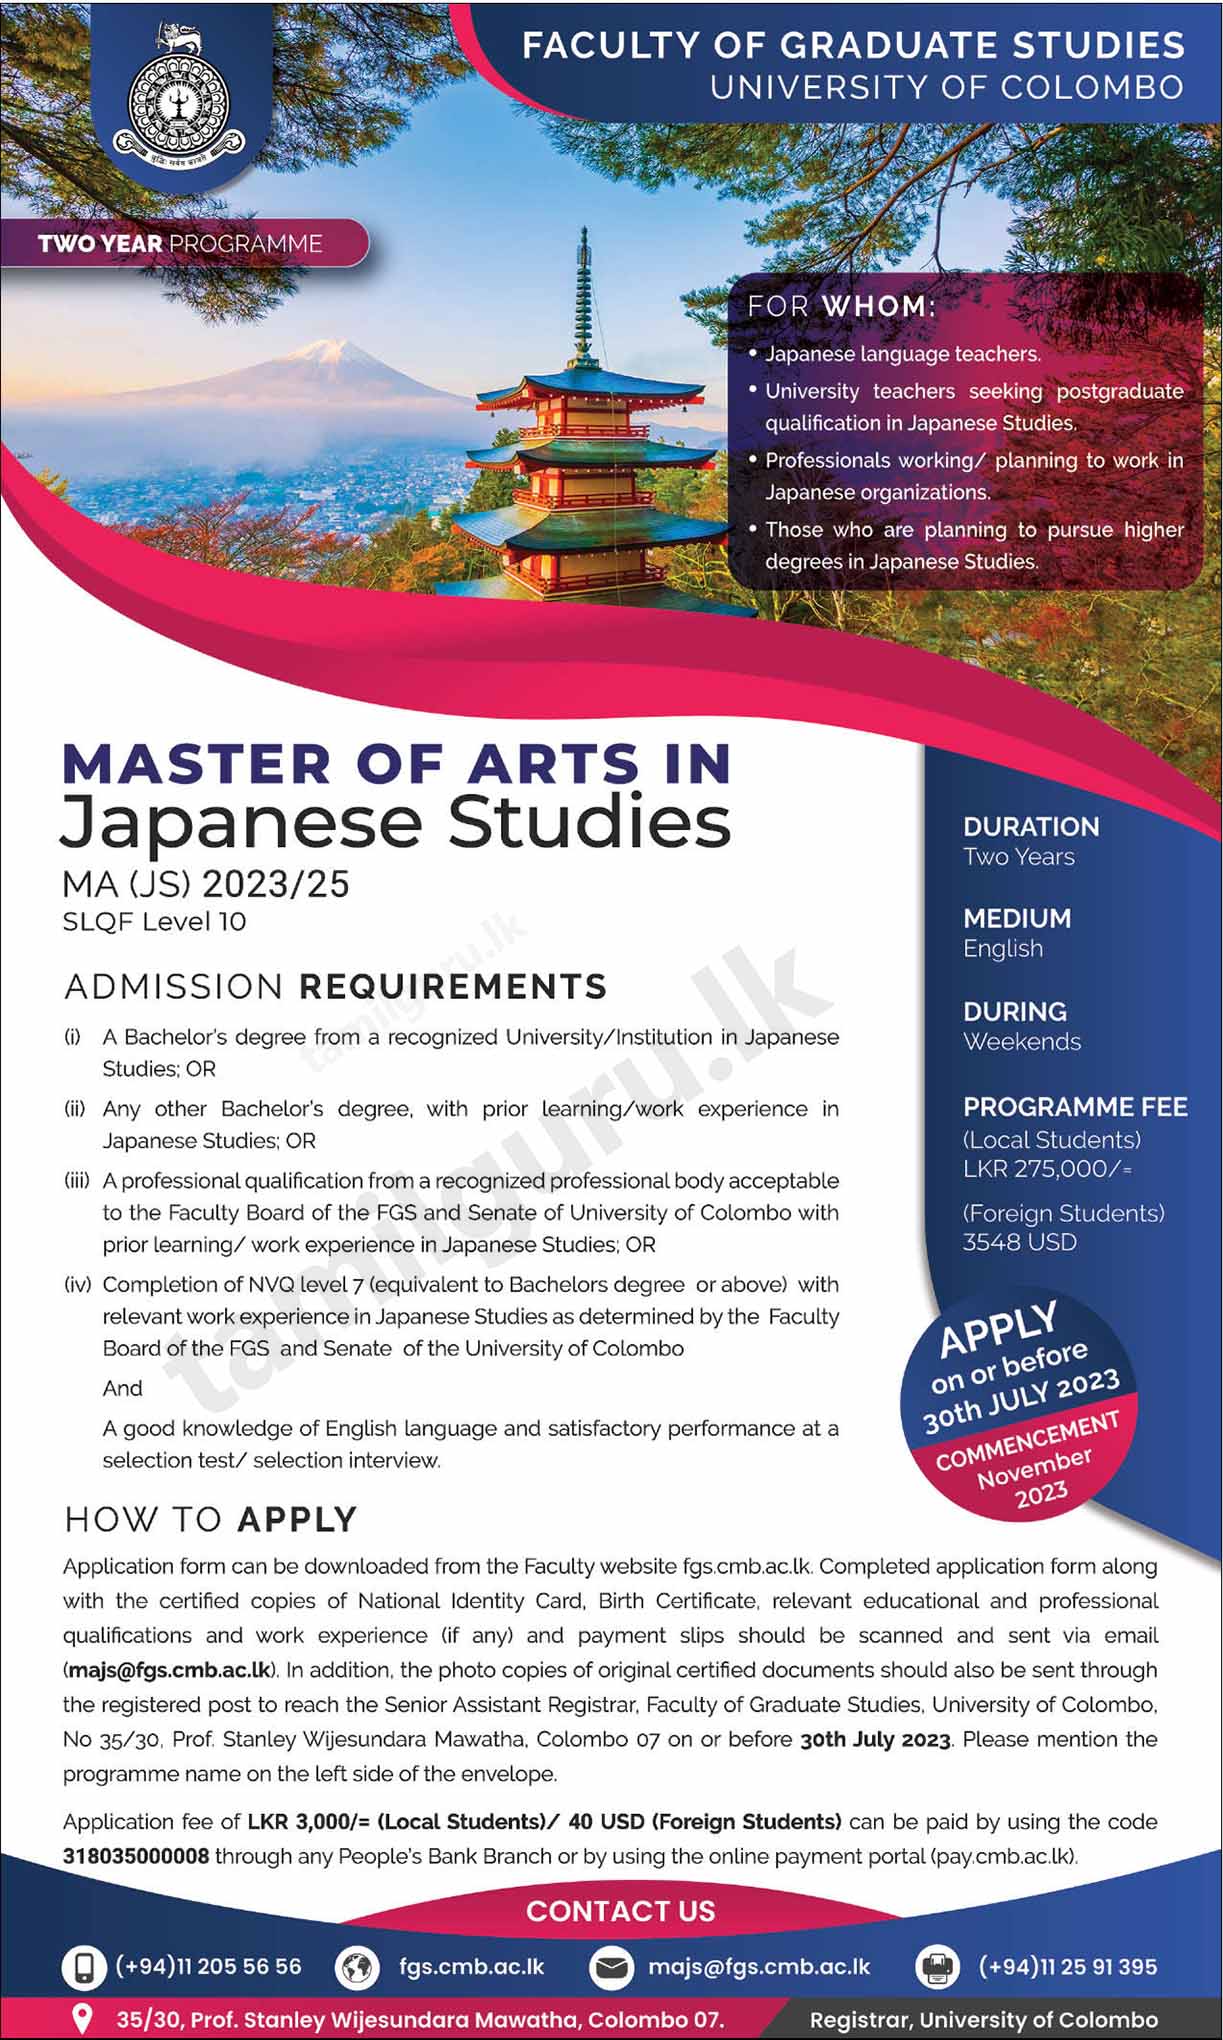 Master of Arts (MA) in Japanese Studies 2023 at University of Colombo